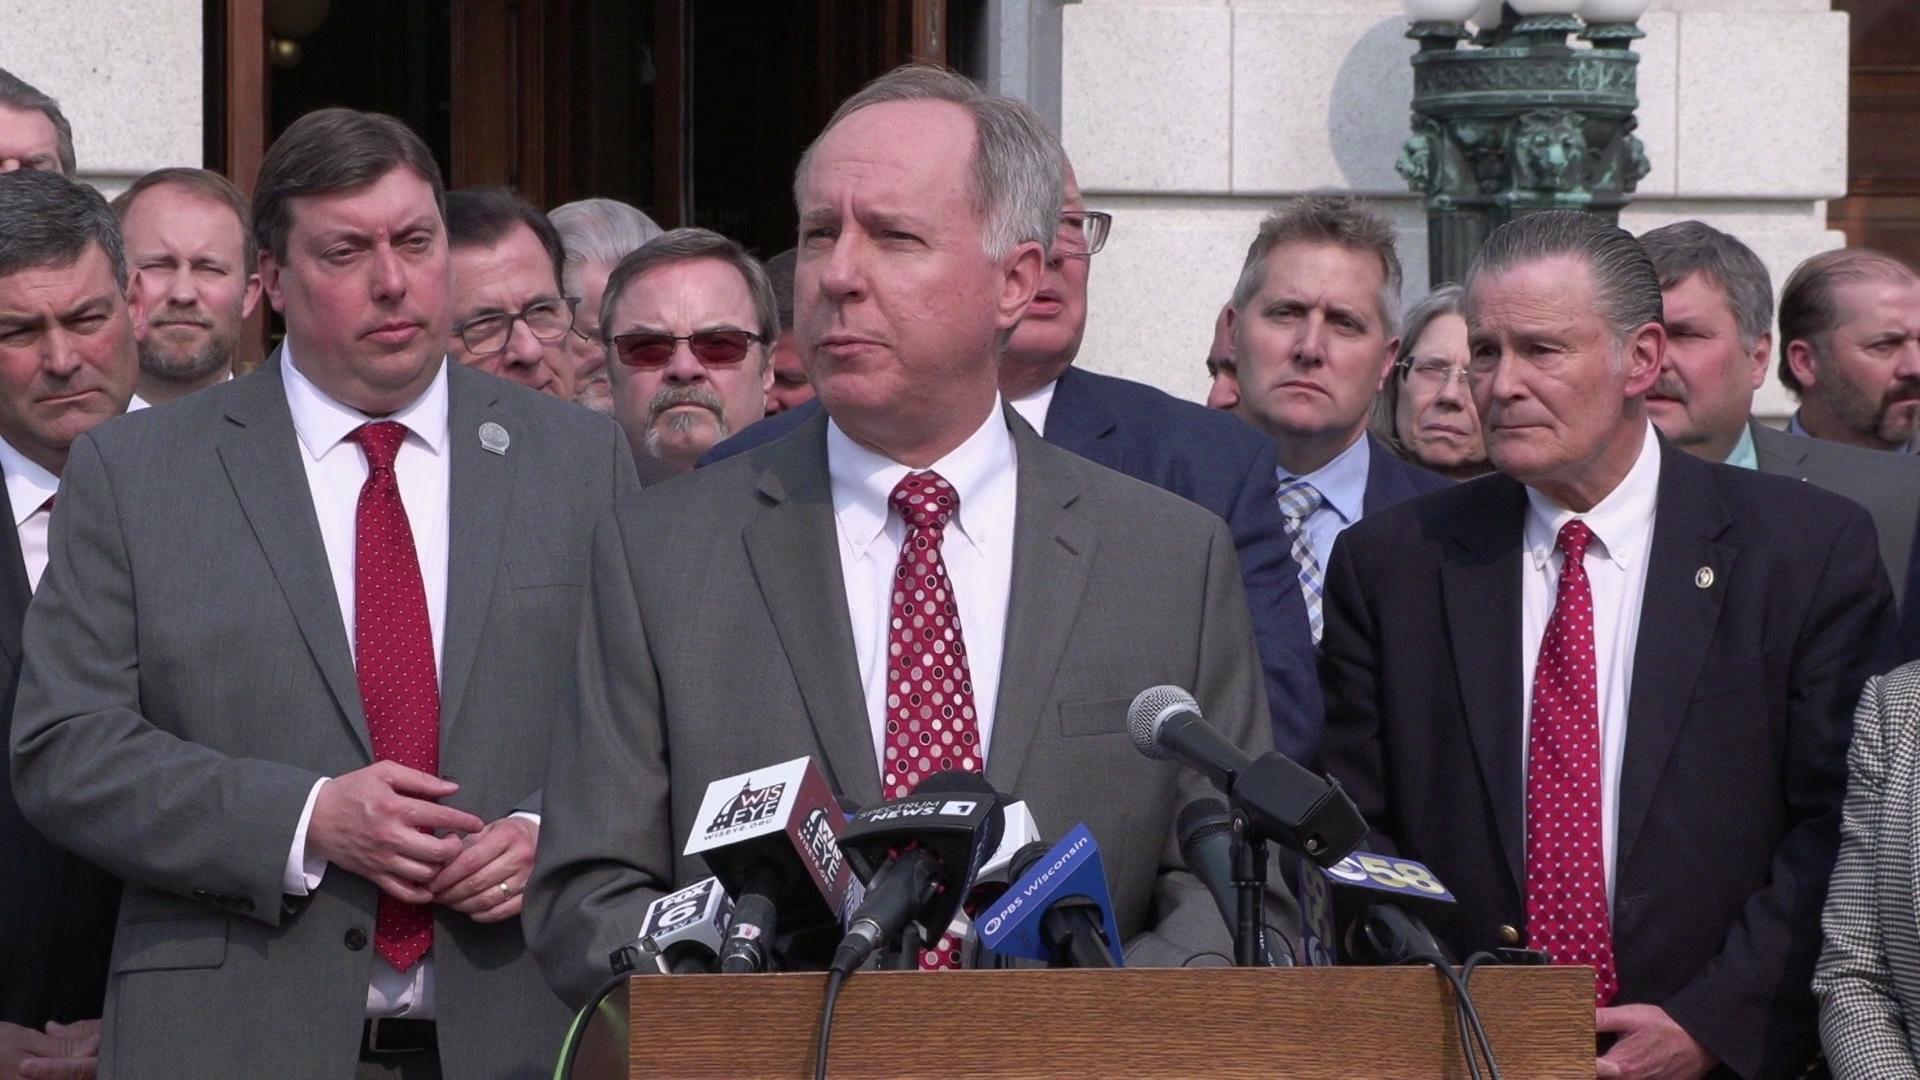 A still image from a video shows Robin Vos speaking into podium microphones and Republican members of the Wisconsin Assembly standing behind him.